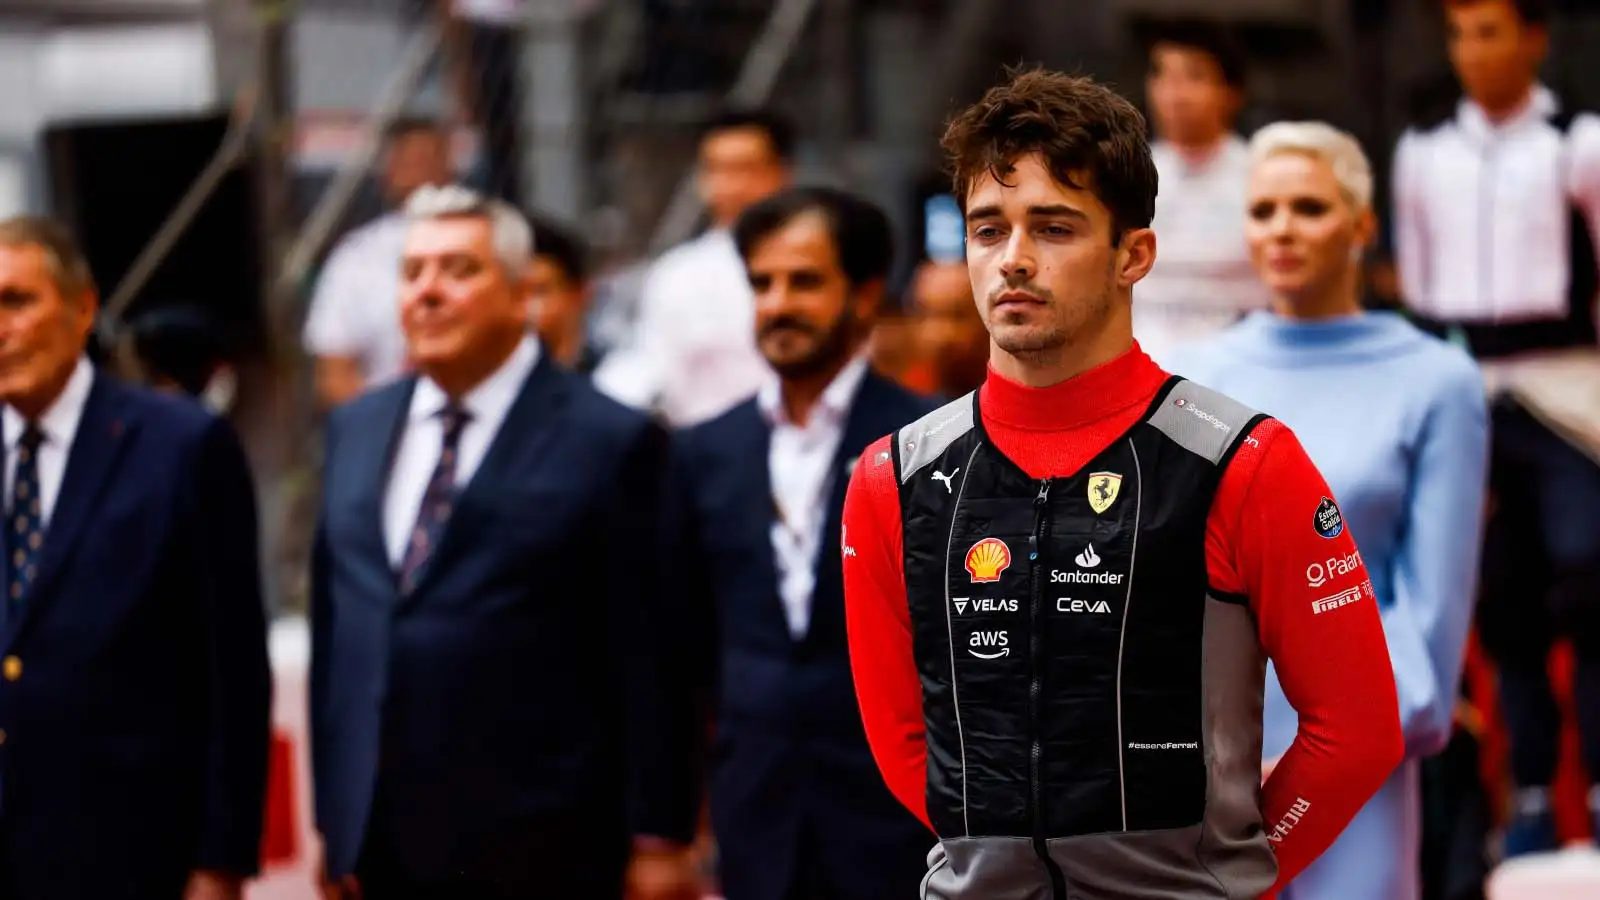 Charles Leclerc in the grid ceremony. Monaco May 2022.